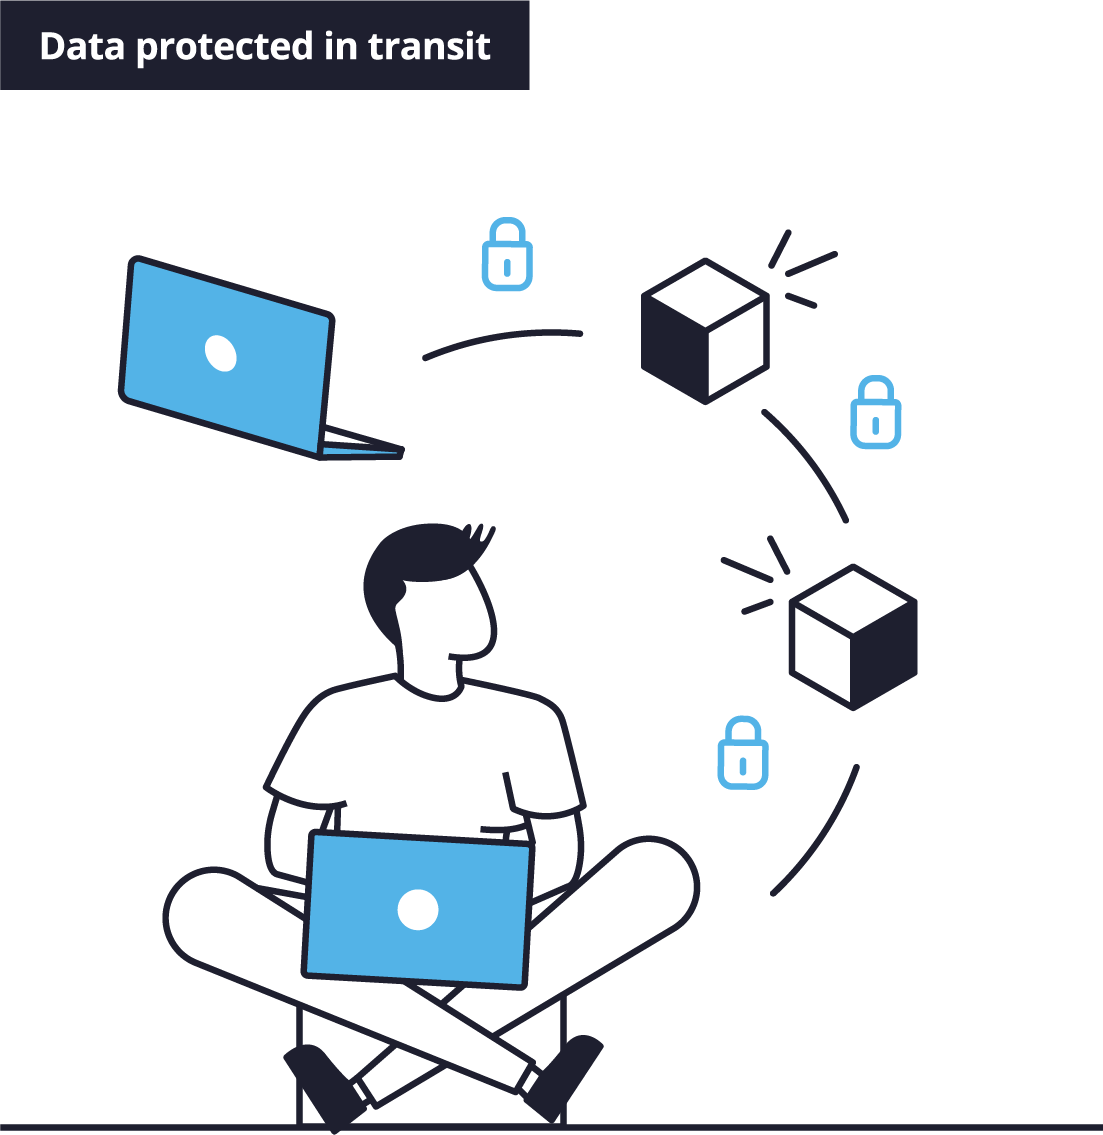 Data protected in transit